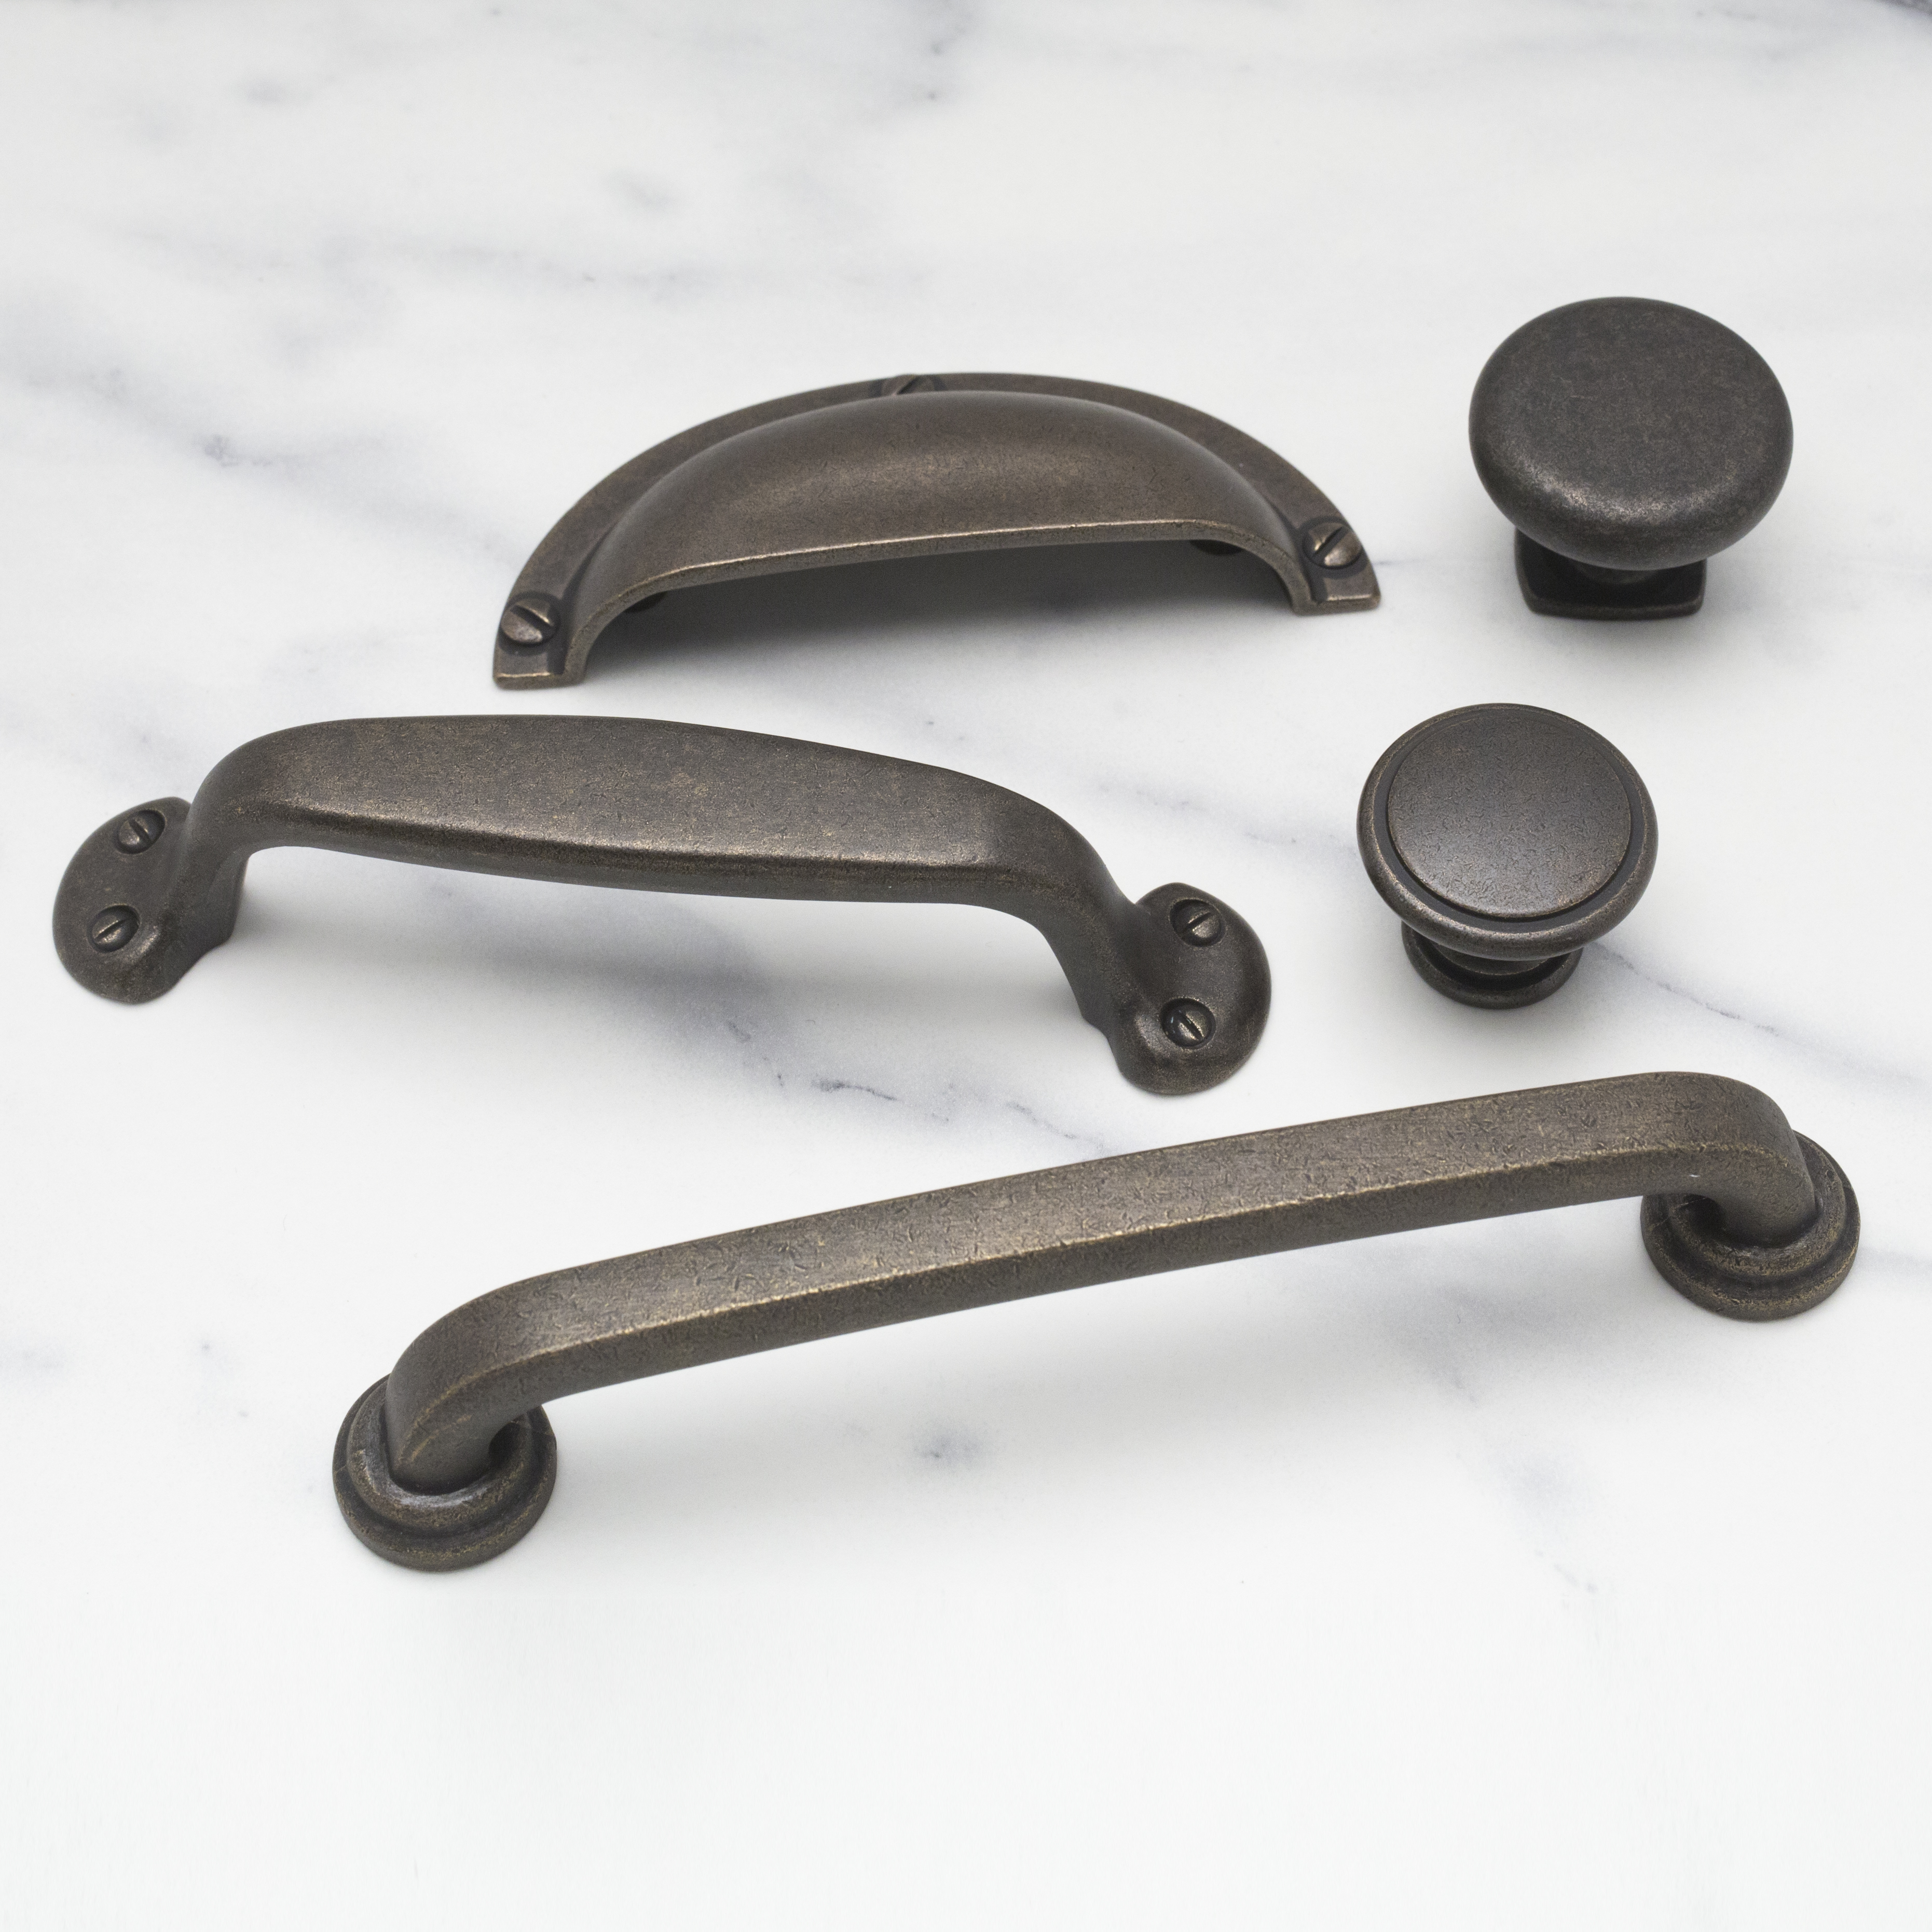 Industrial Look Colors Traditional D369 Shell Handles shown with D1175 Handle and DK1357 Knob